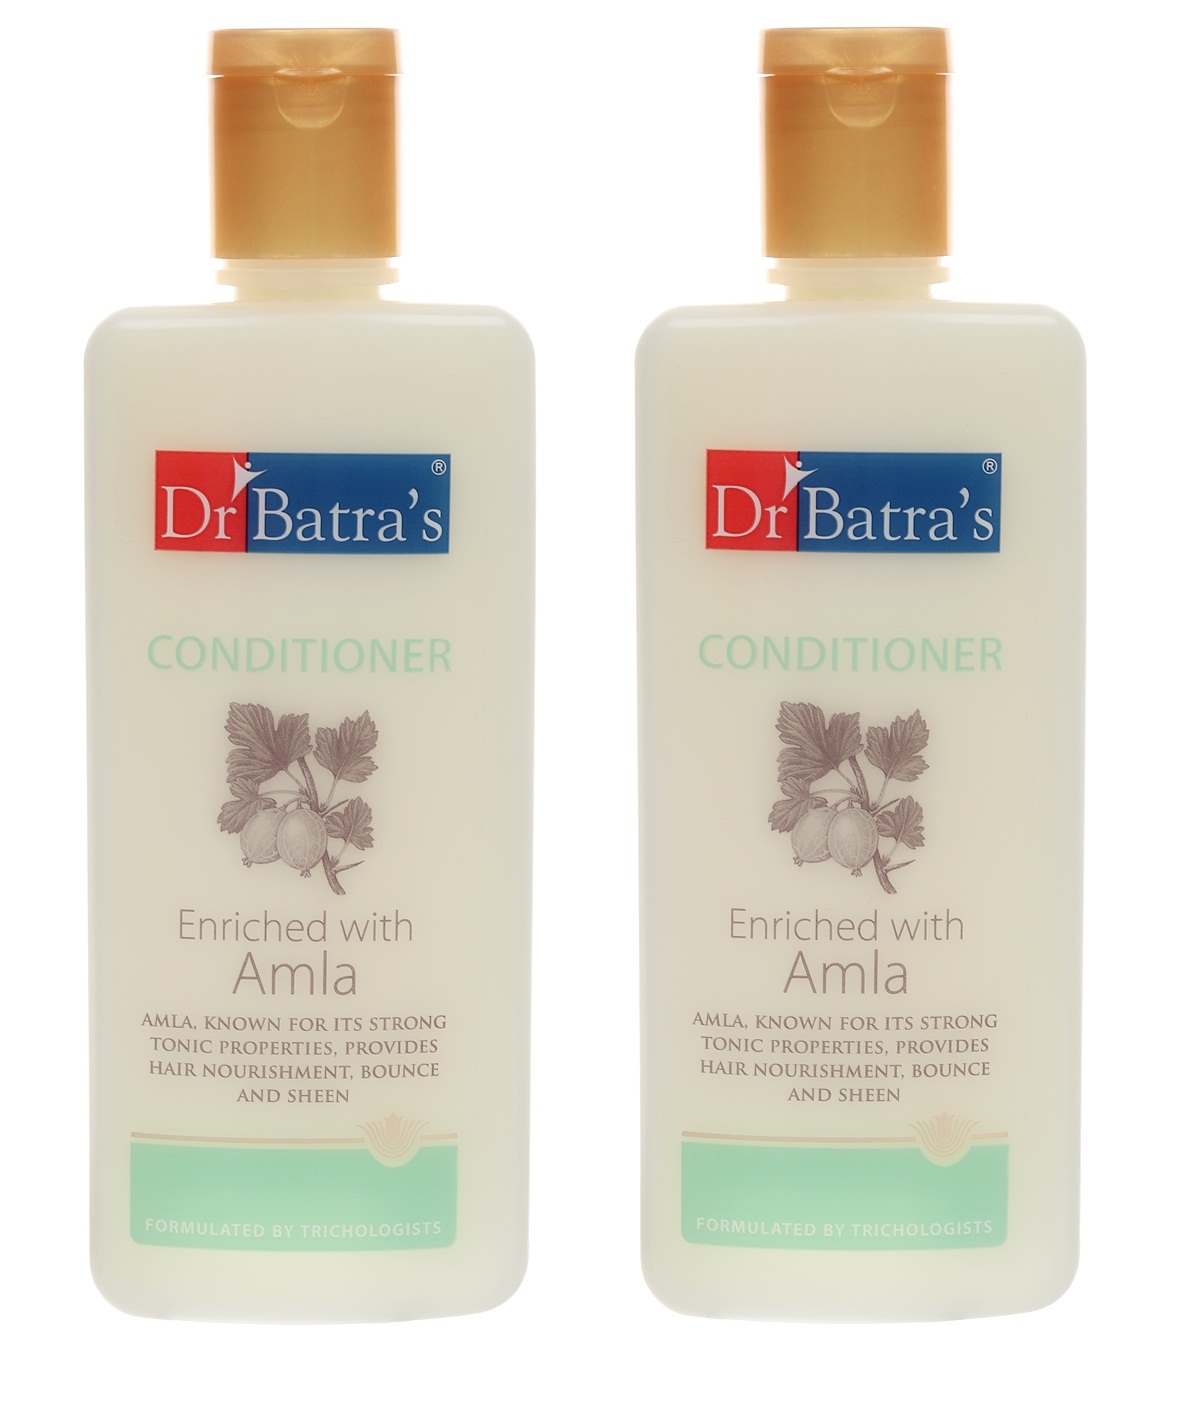 Dr Batra's | Dr Batra's Conditioner Enriched With Amla - 200 ml (Pack of 2)